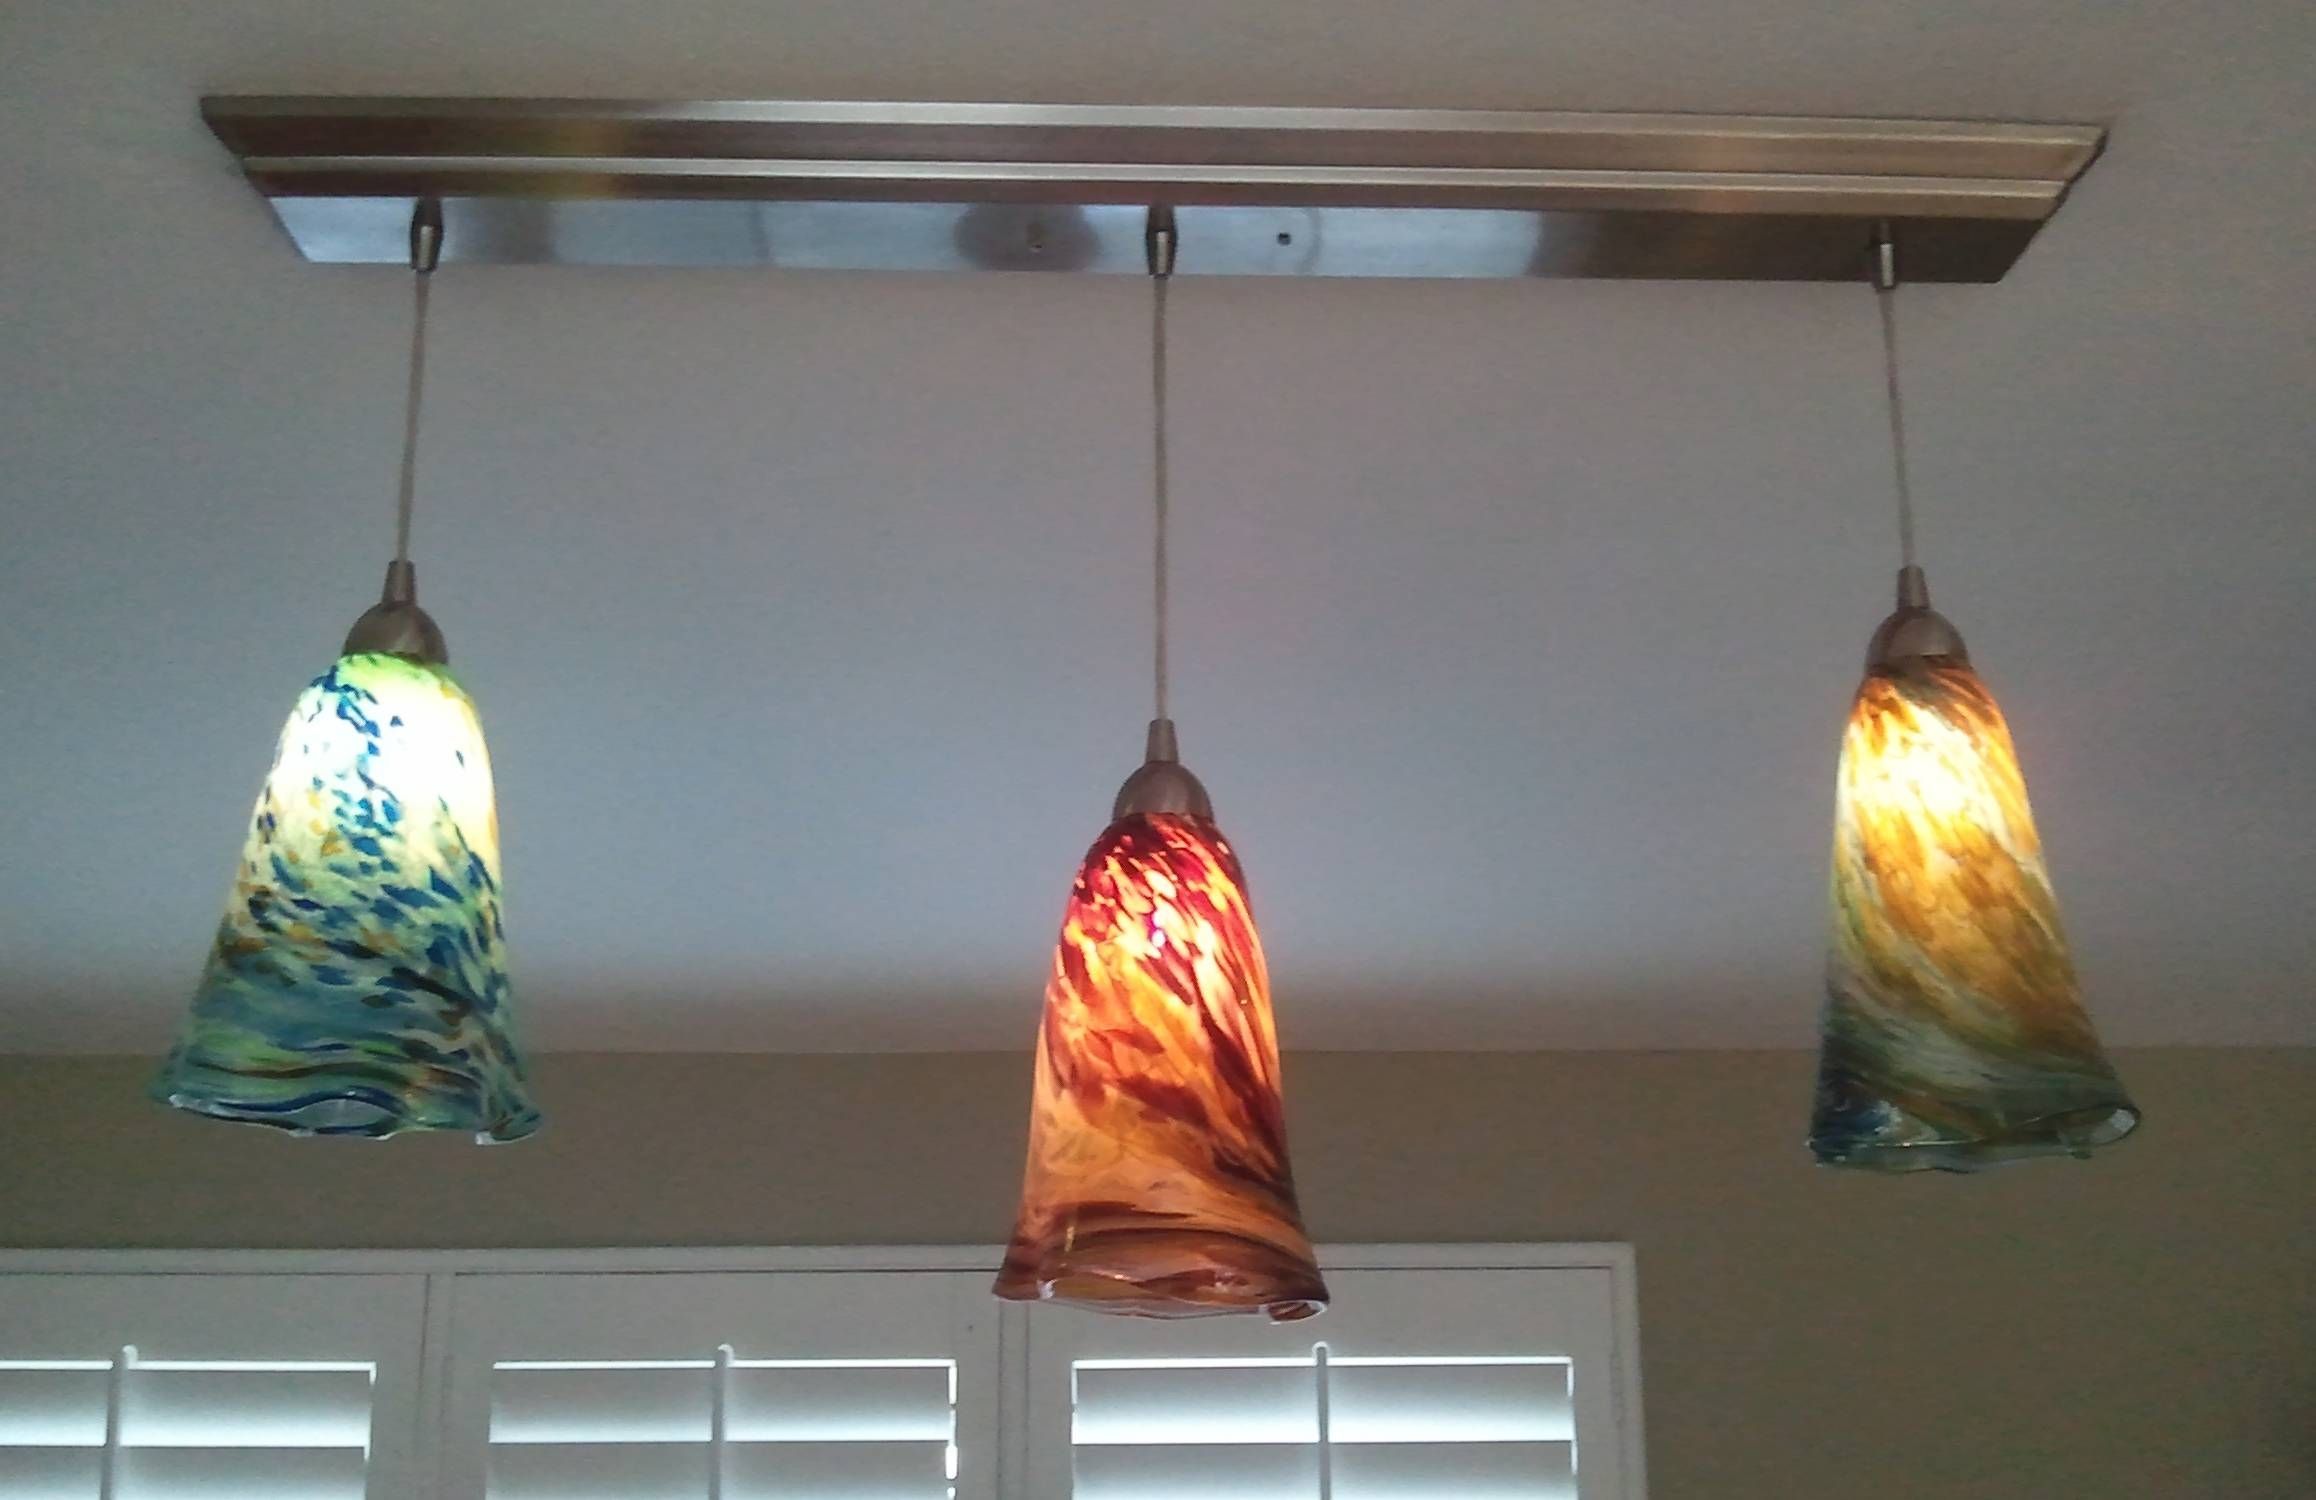 Fresh Replacement Glass Shades For Pendant Lights 36 About Remodel Within Glass Globes For Pendant Lights 